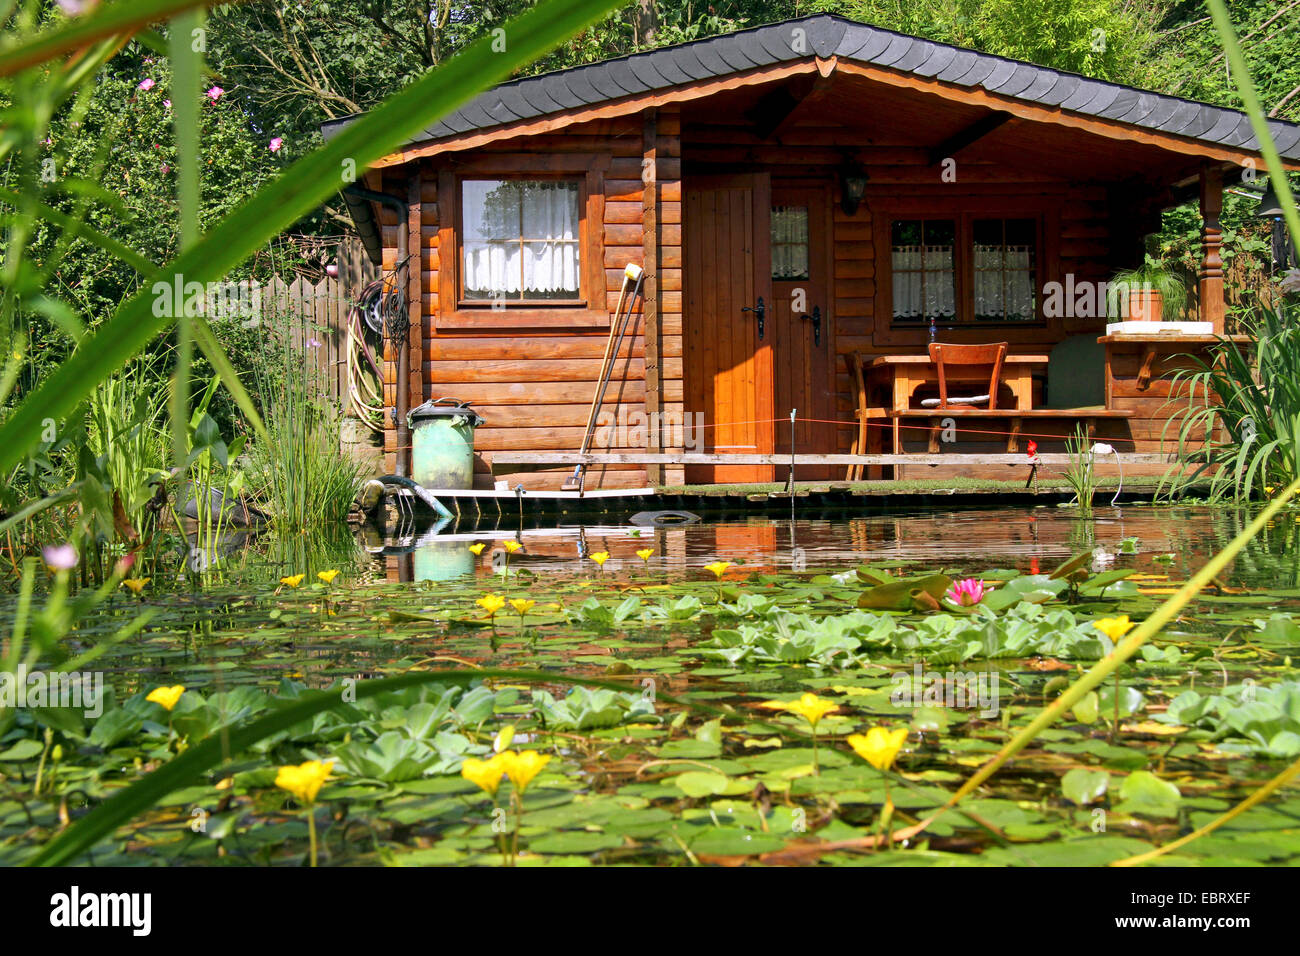 fishpond with wooden hut in summer, Germany Stock Photo